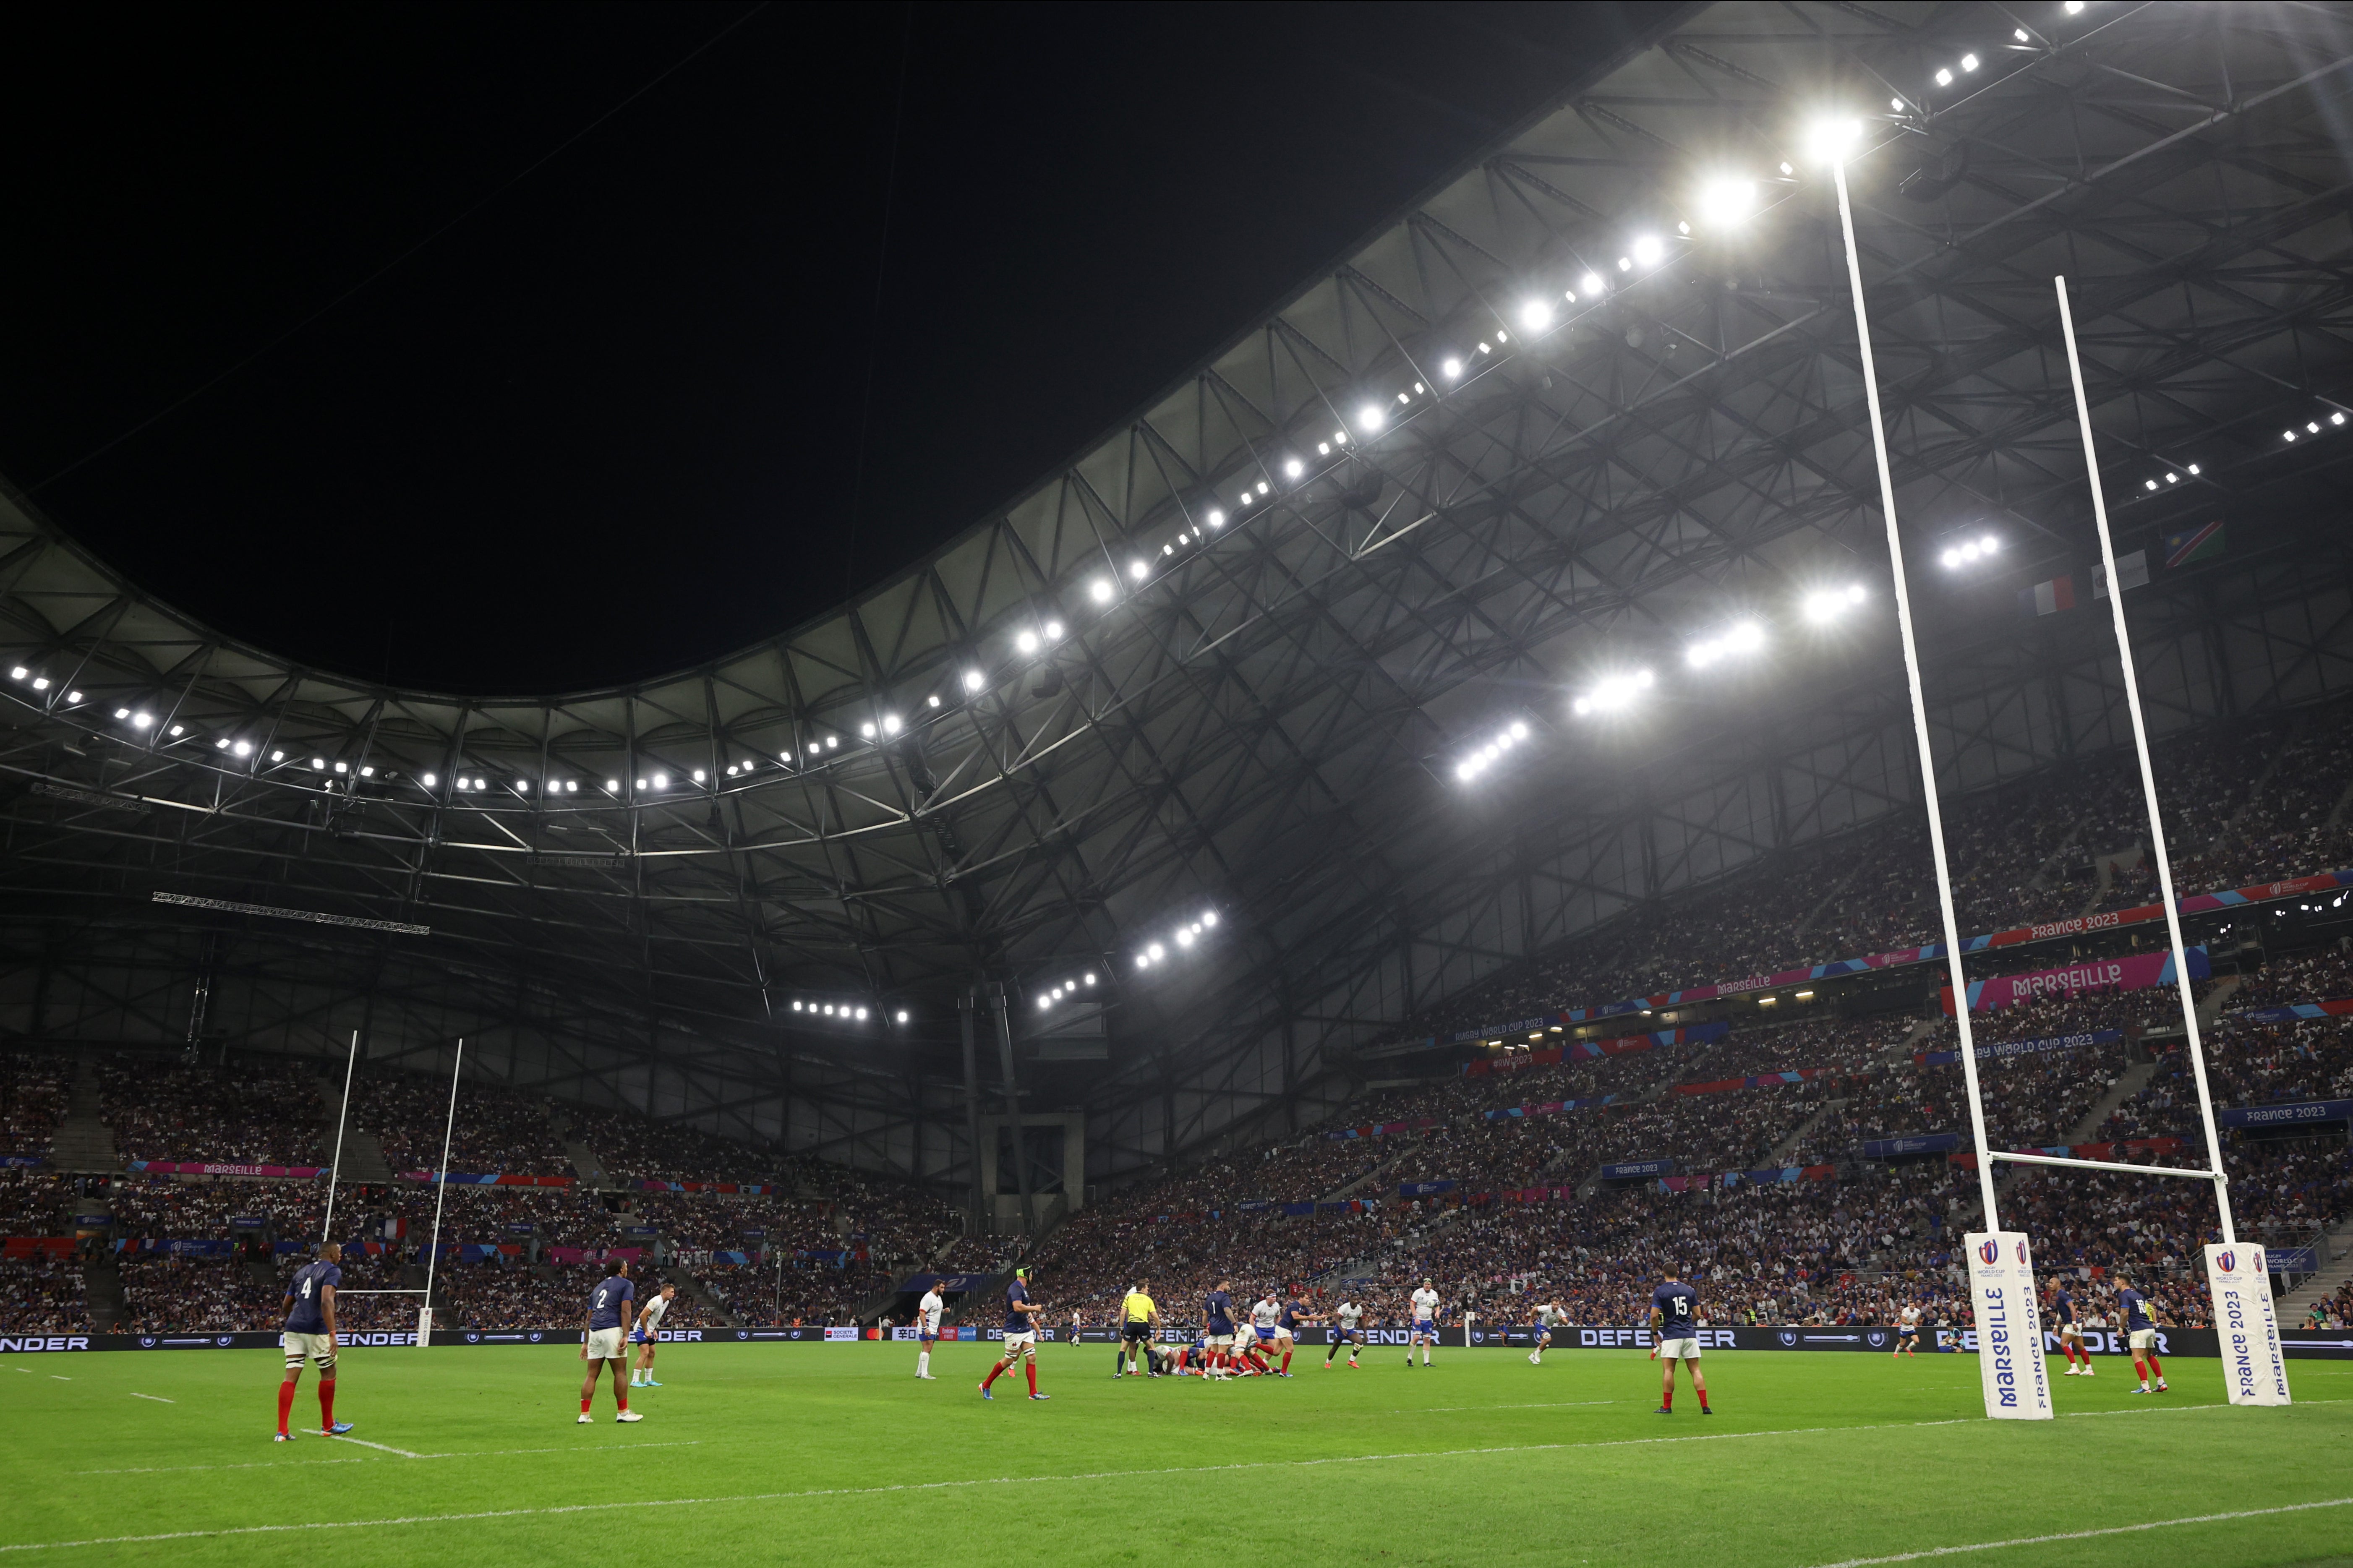 Marseille’s Stade Velodrome will host France and Ireland with the Stade de France unavailable